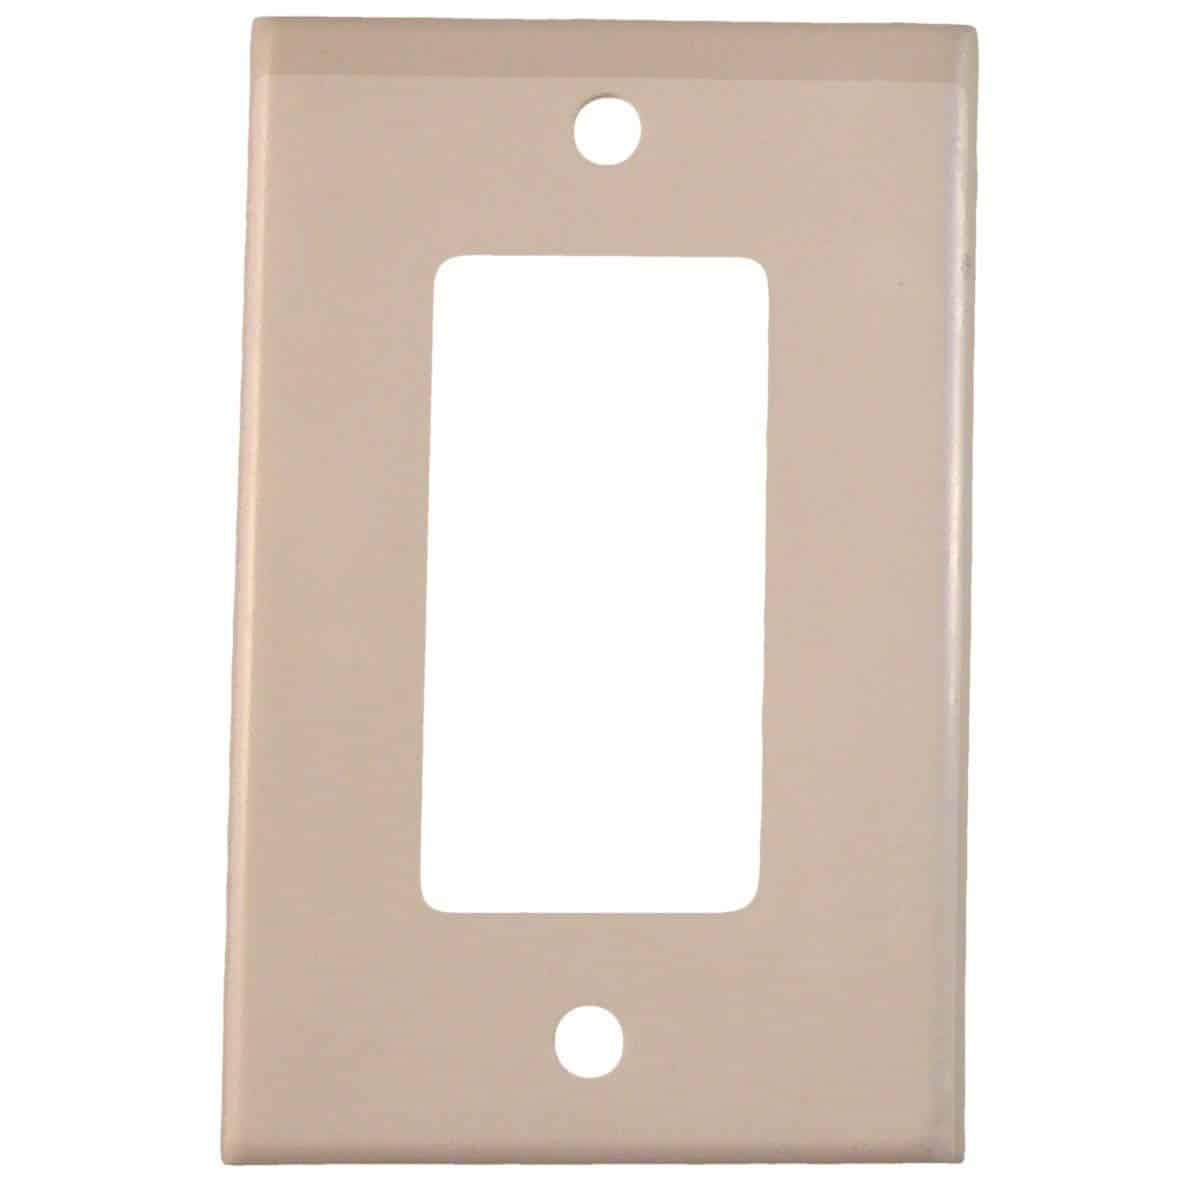 Wall Cover Plate, 1 Gang GFCI, White Plastic, 1 Pack. In Stock. Ships  Today. - Cable Protector Works - Elasco Wheel Chocks, Cable Protectors and  Cable Ramps %